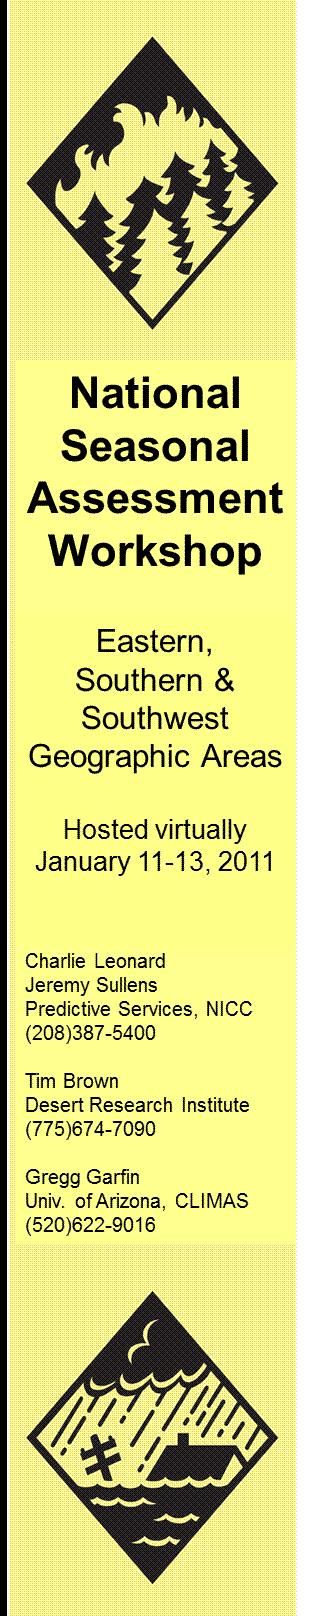 2011 National Seasonal Assessment Workshop for the Eastern, Southern, & Southwest Geographic Areas On January 11-13, 2011, wildland fire, weather, and climate met virtually for the ninth annual